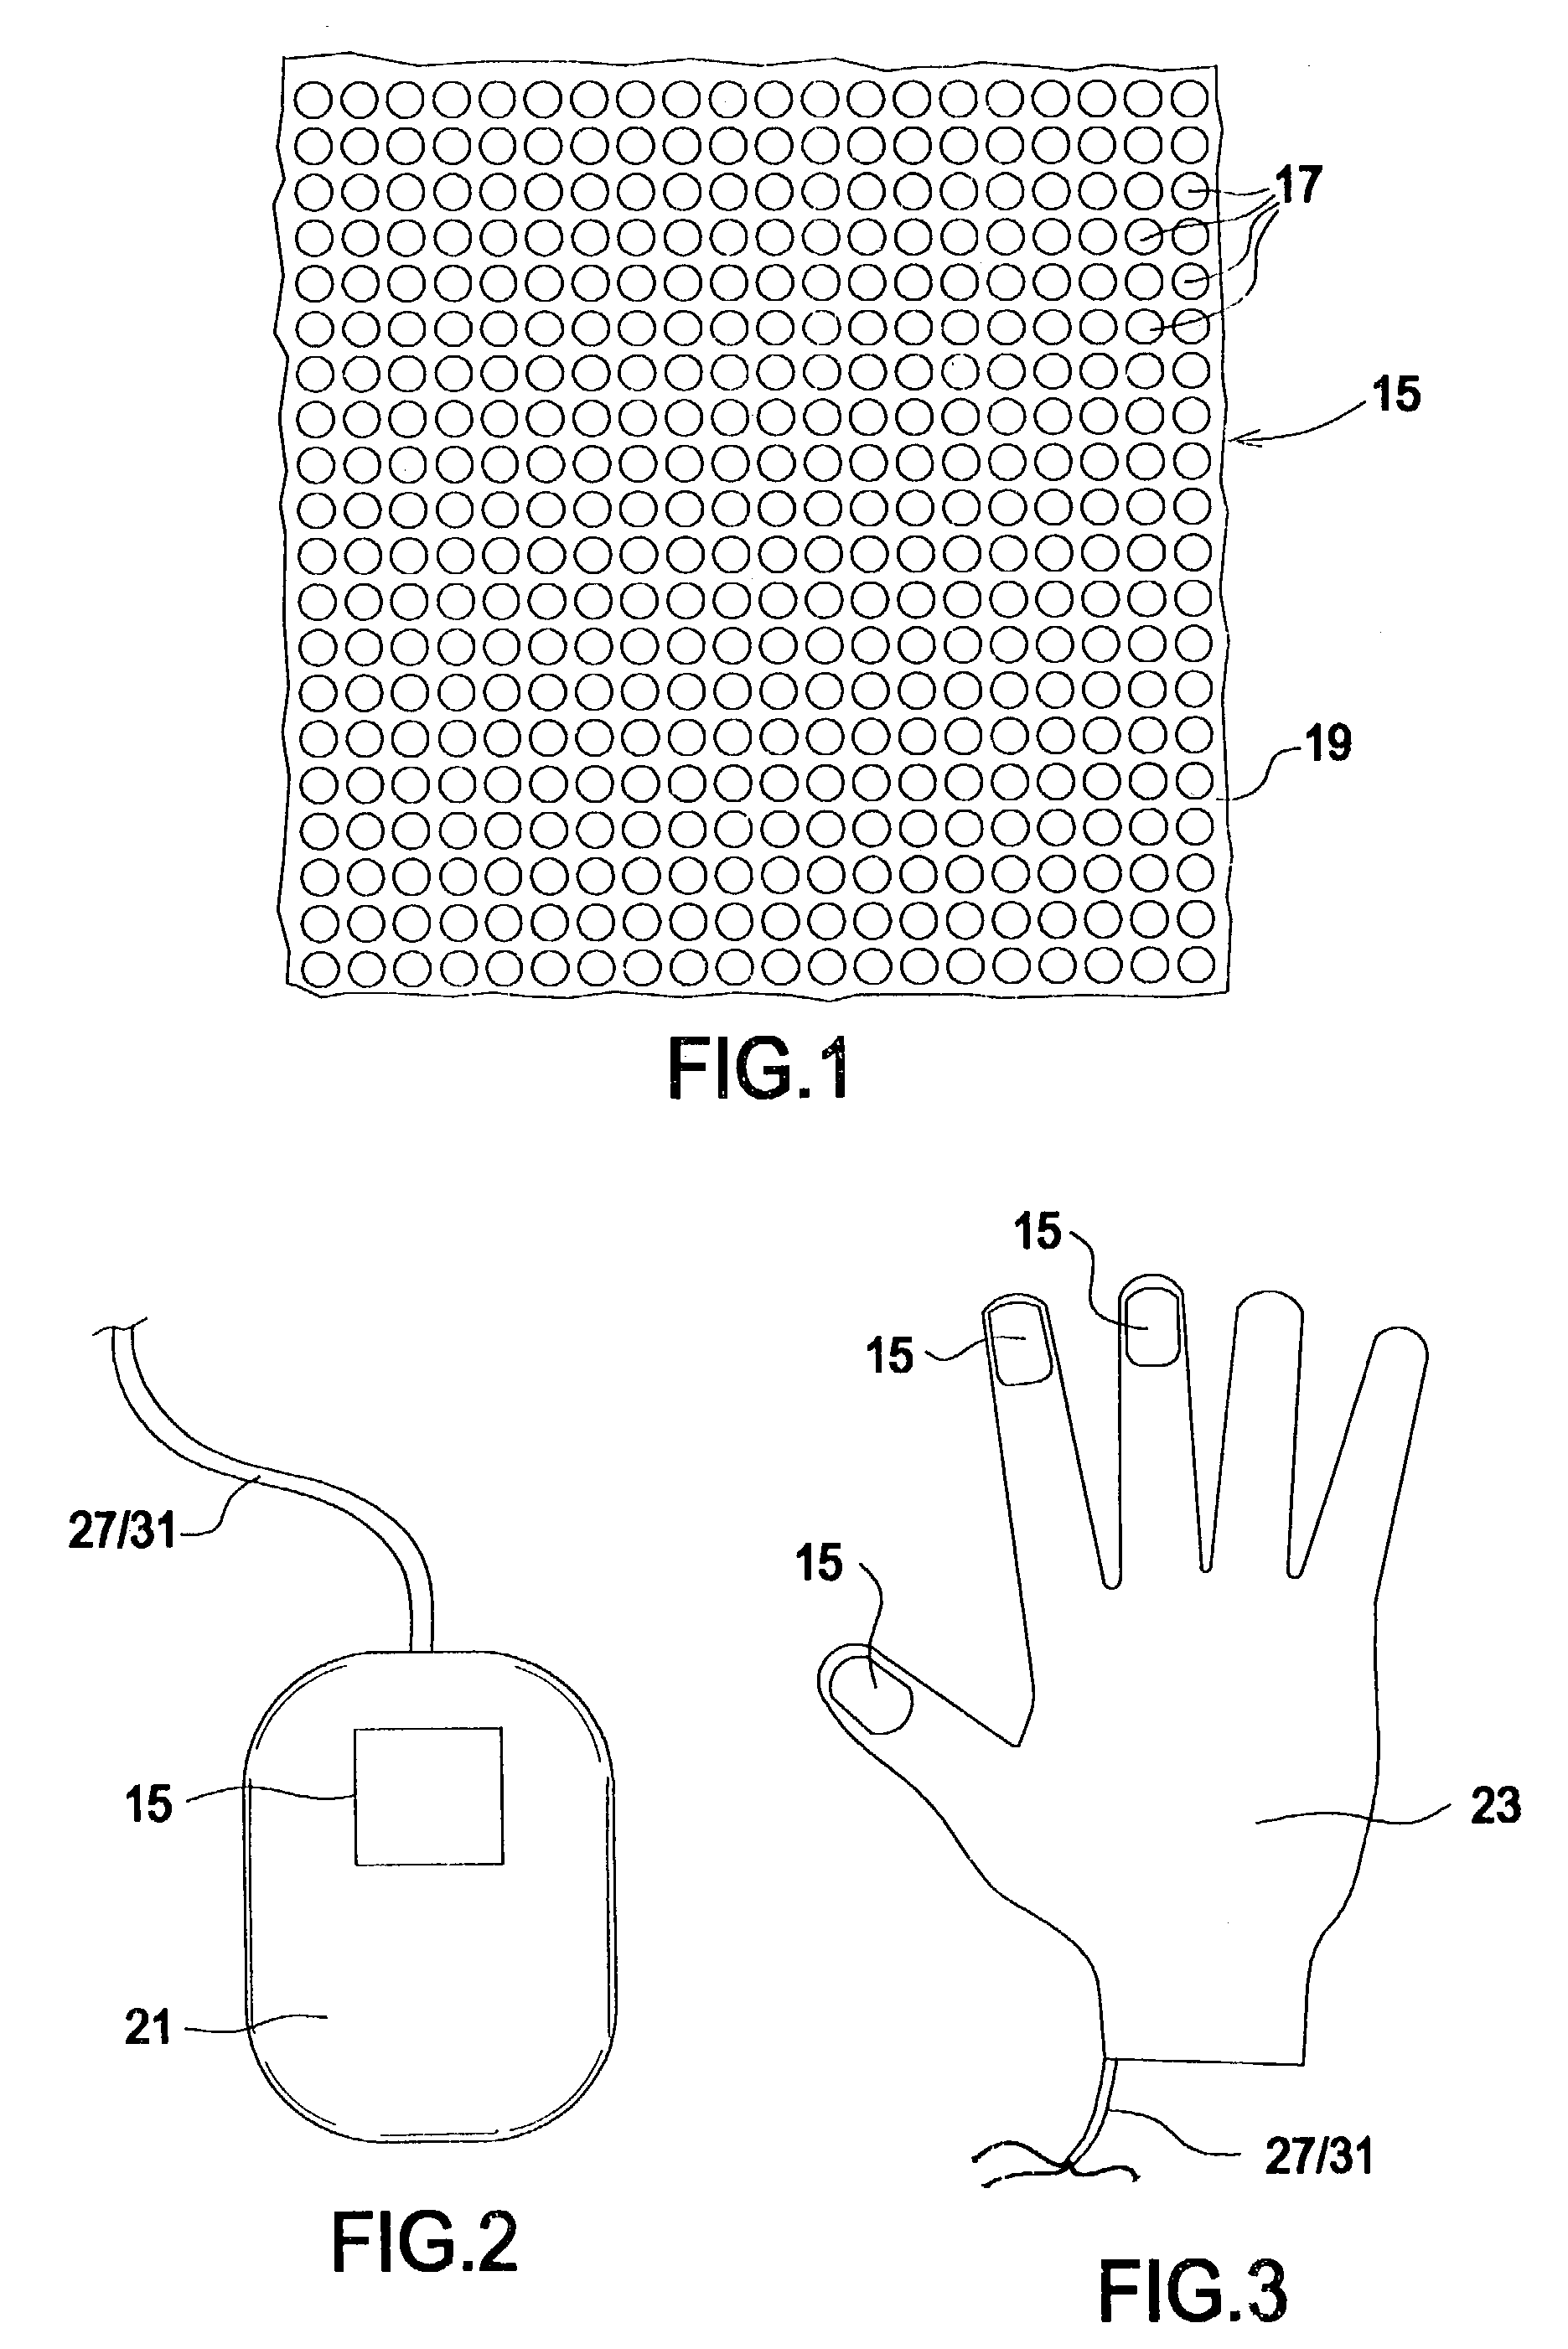 Refreshable scanning tactile graphic display for localized sensory stimulation